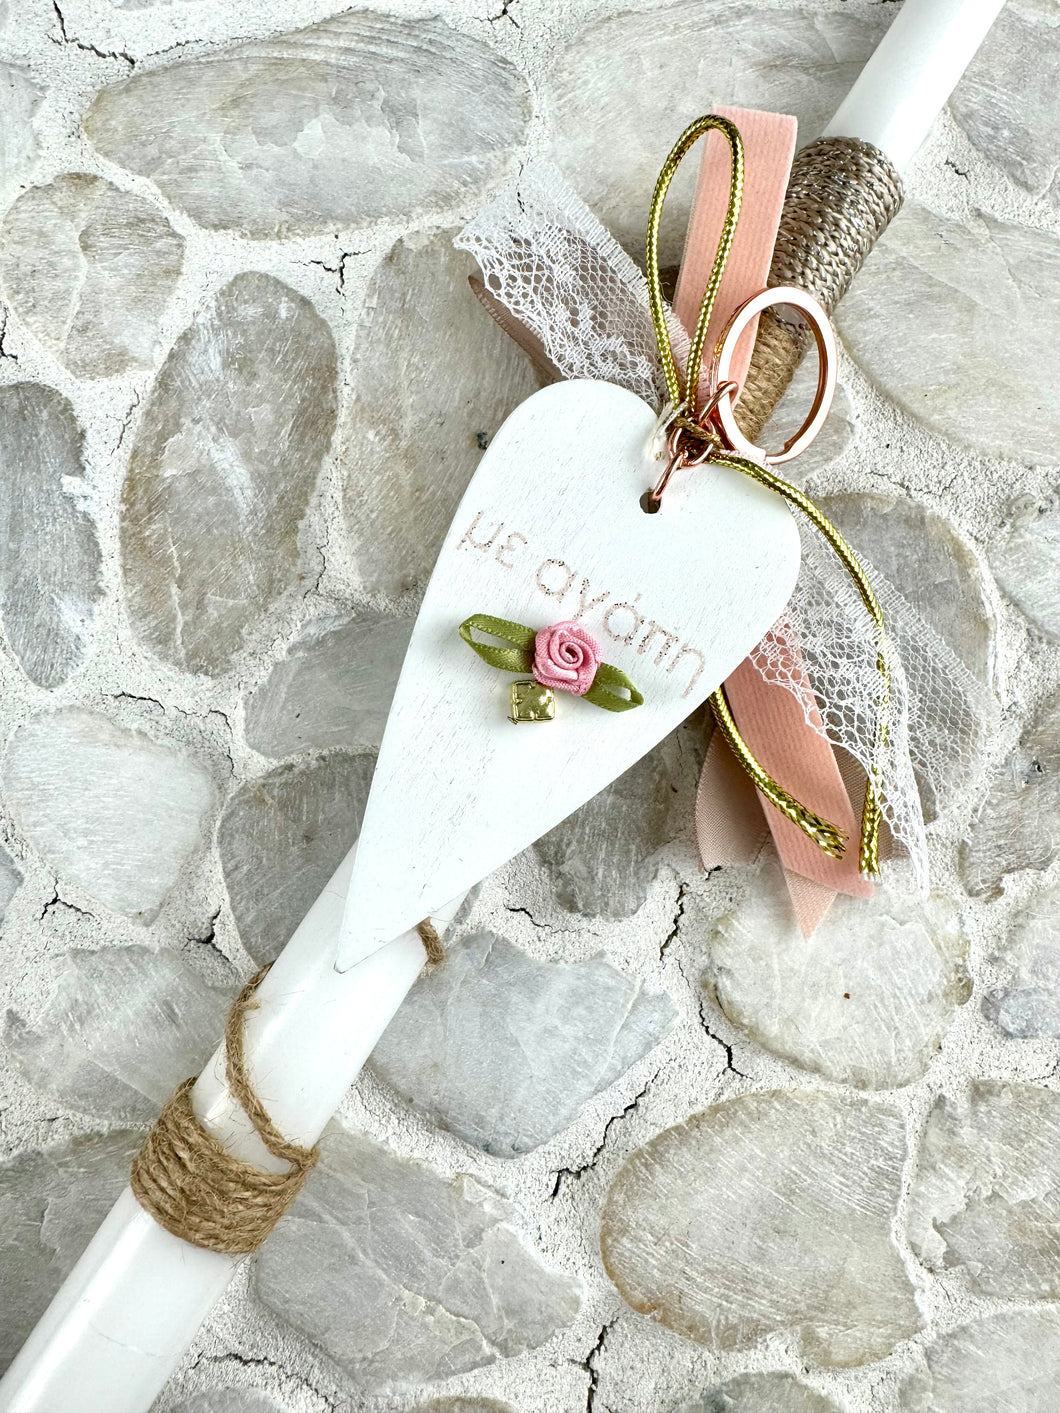 Corded Easter Candle with Wooden Heart Keychain RC202449